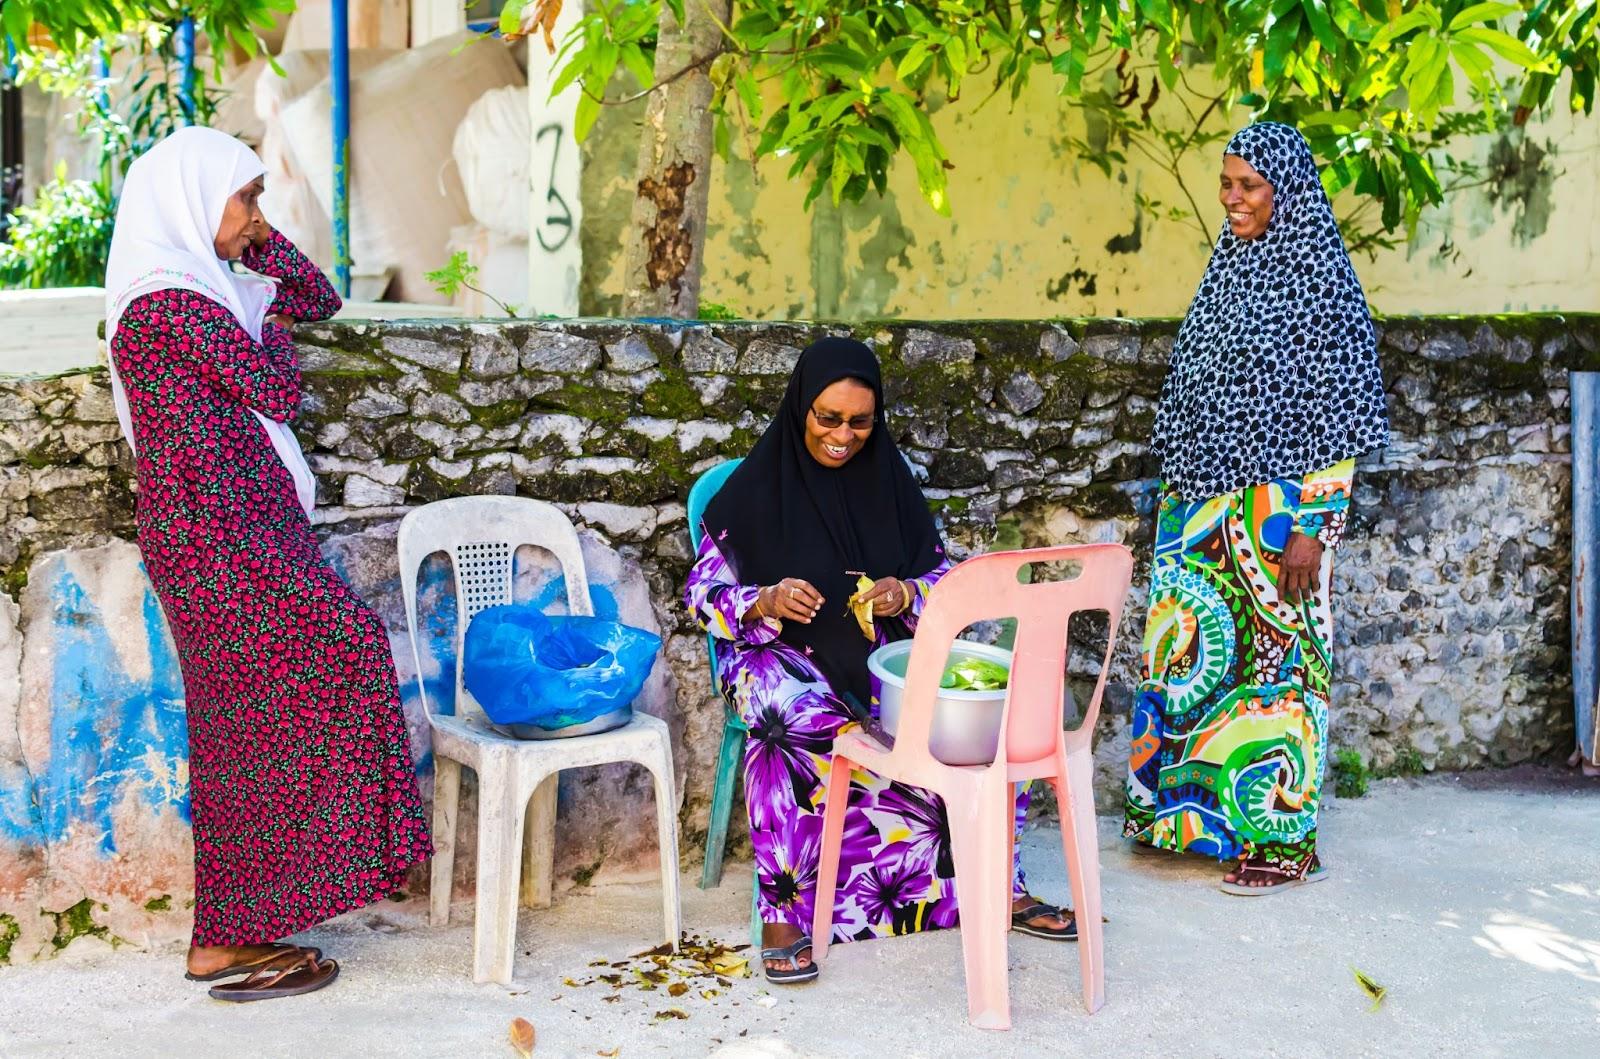 Local women in bright national clothes harvesting leaves on one of the central streets of small tropical island, Kaafu Atoll, Kuda Huraa Island, Maldives